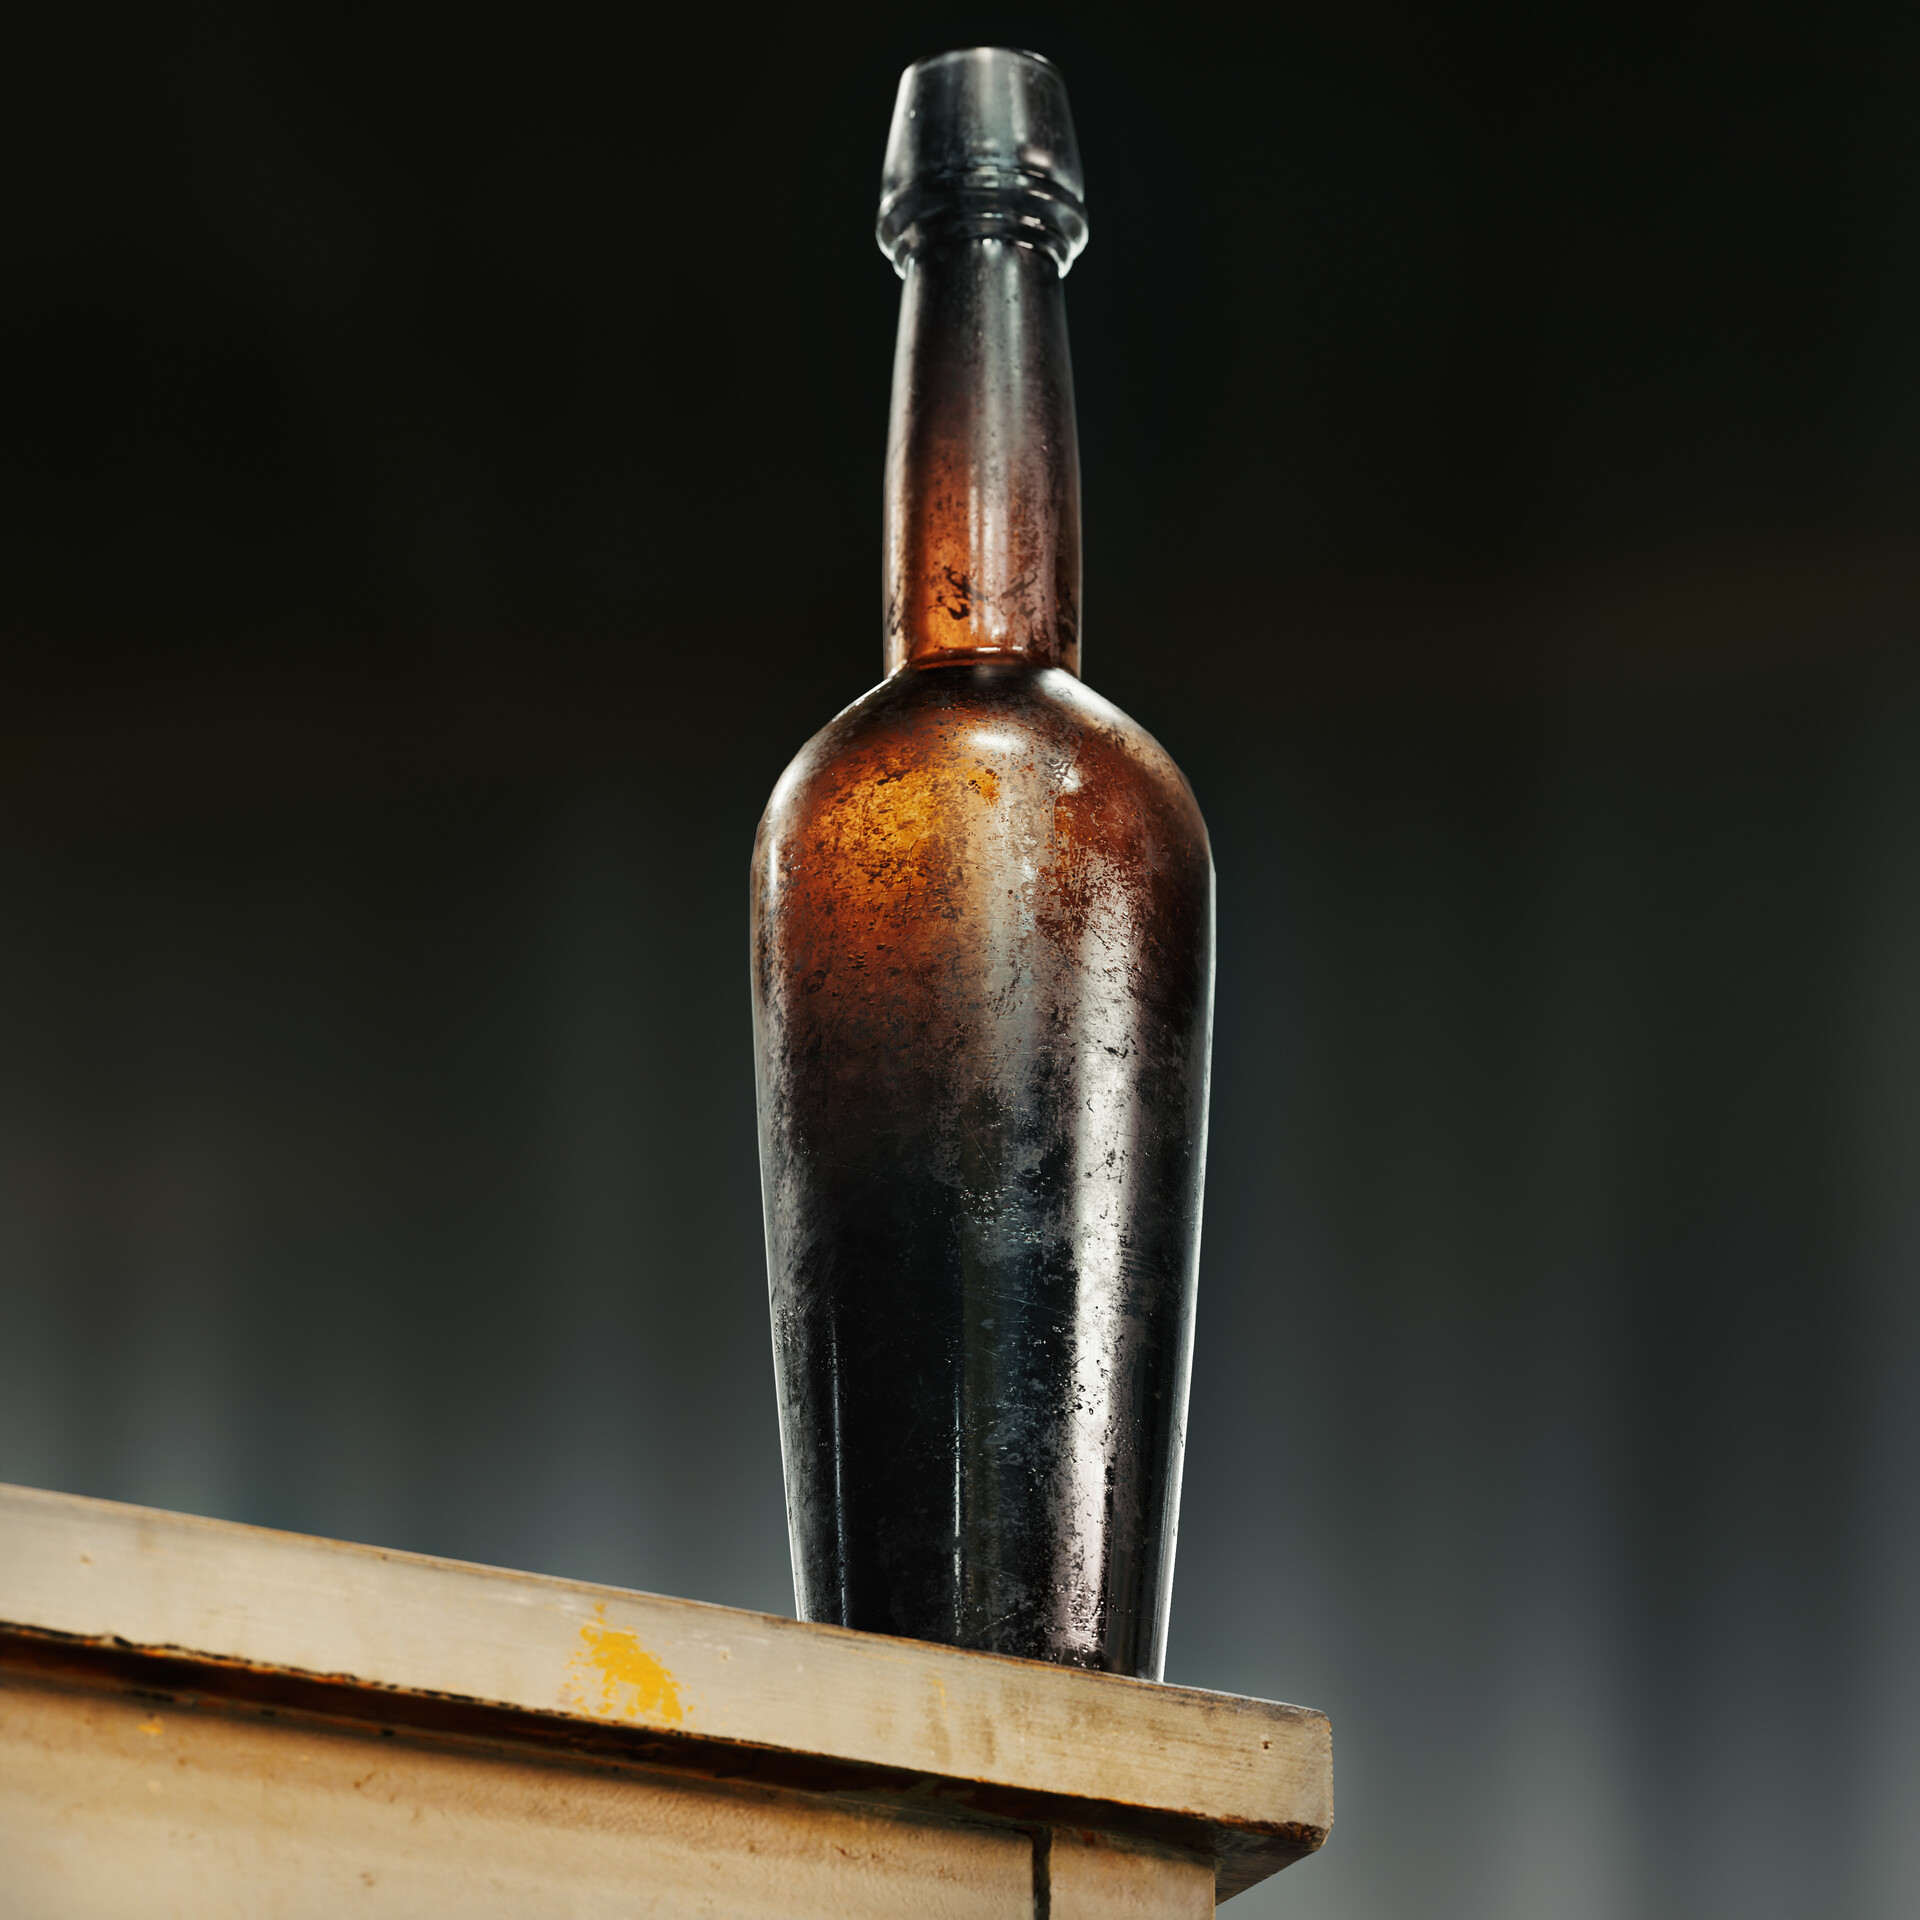 Bottle beer glass material help - Materials and Textures - Blender Artists  Community